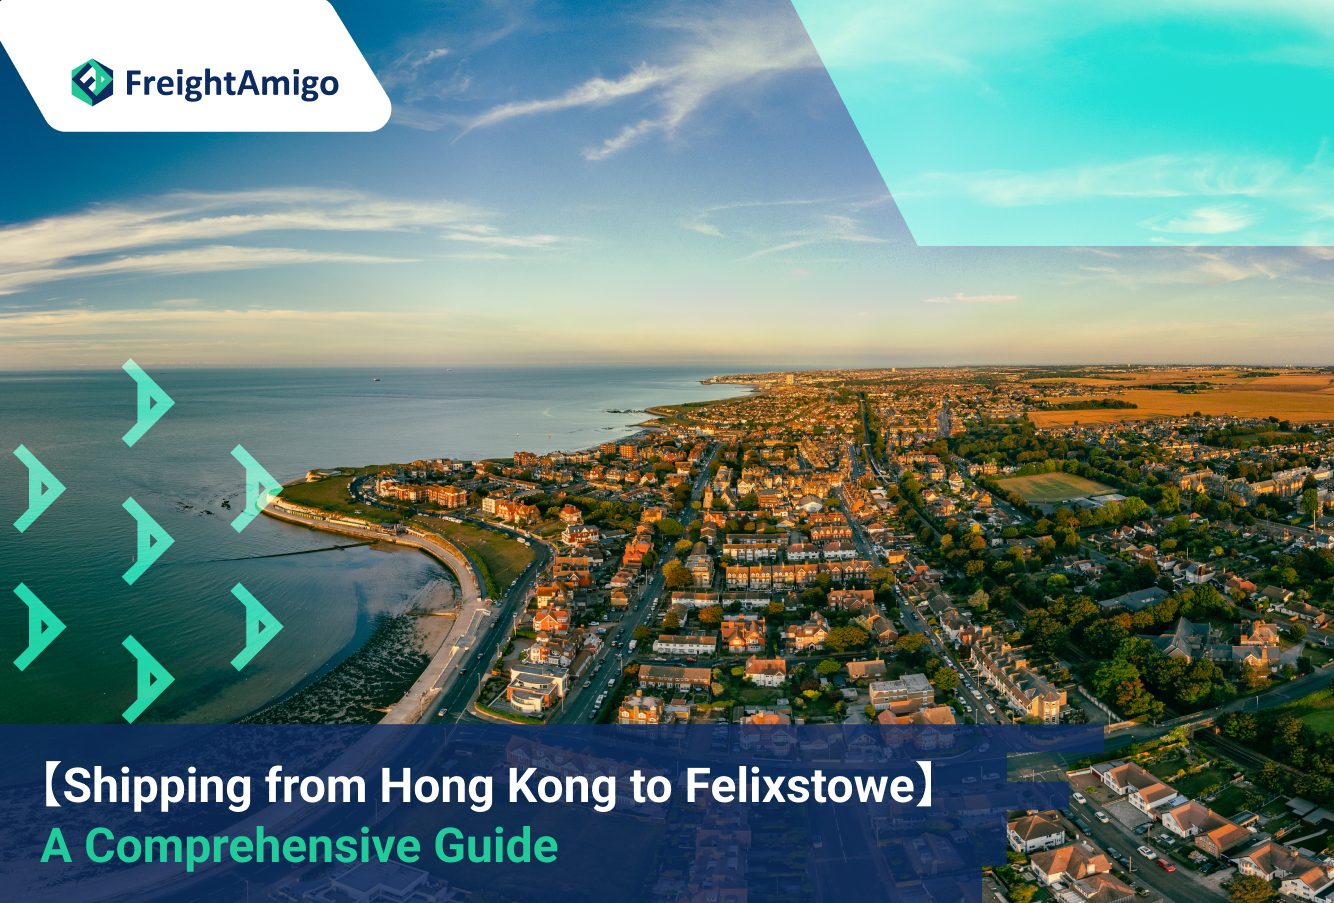 Shipping from Hong Kong to Felixstowe: A Comprehensive Guide